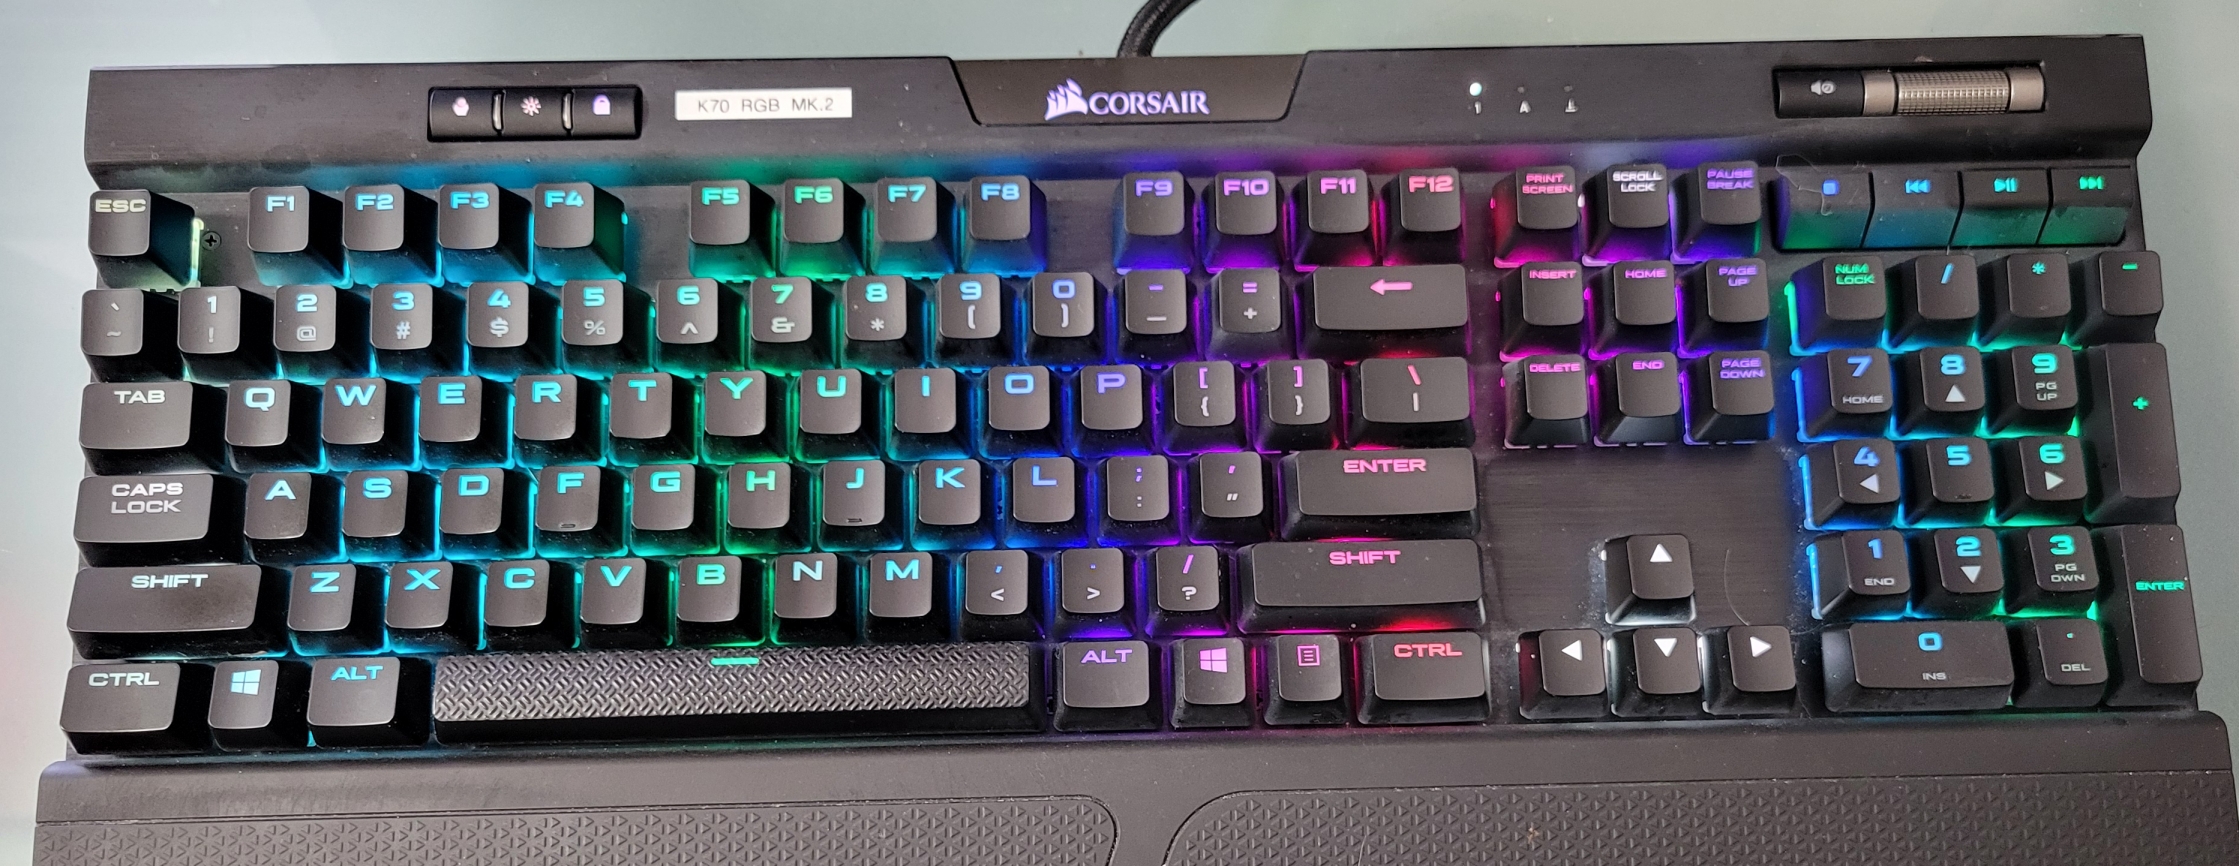 Corsair K70 RGB Keyboard with lighted keys in rainbow of colors